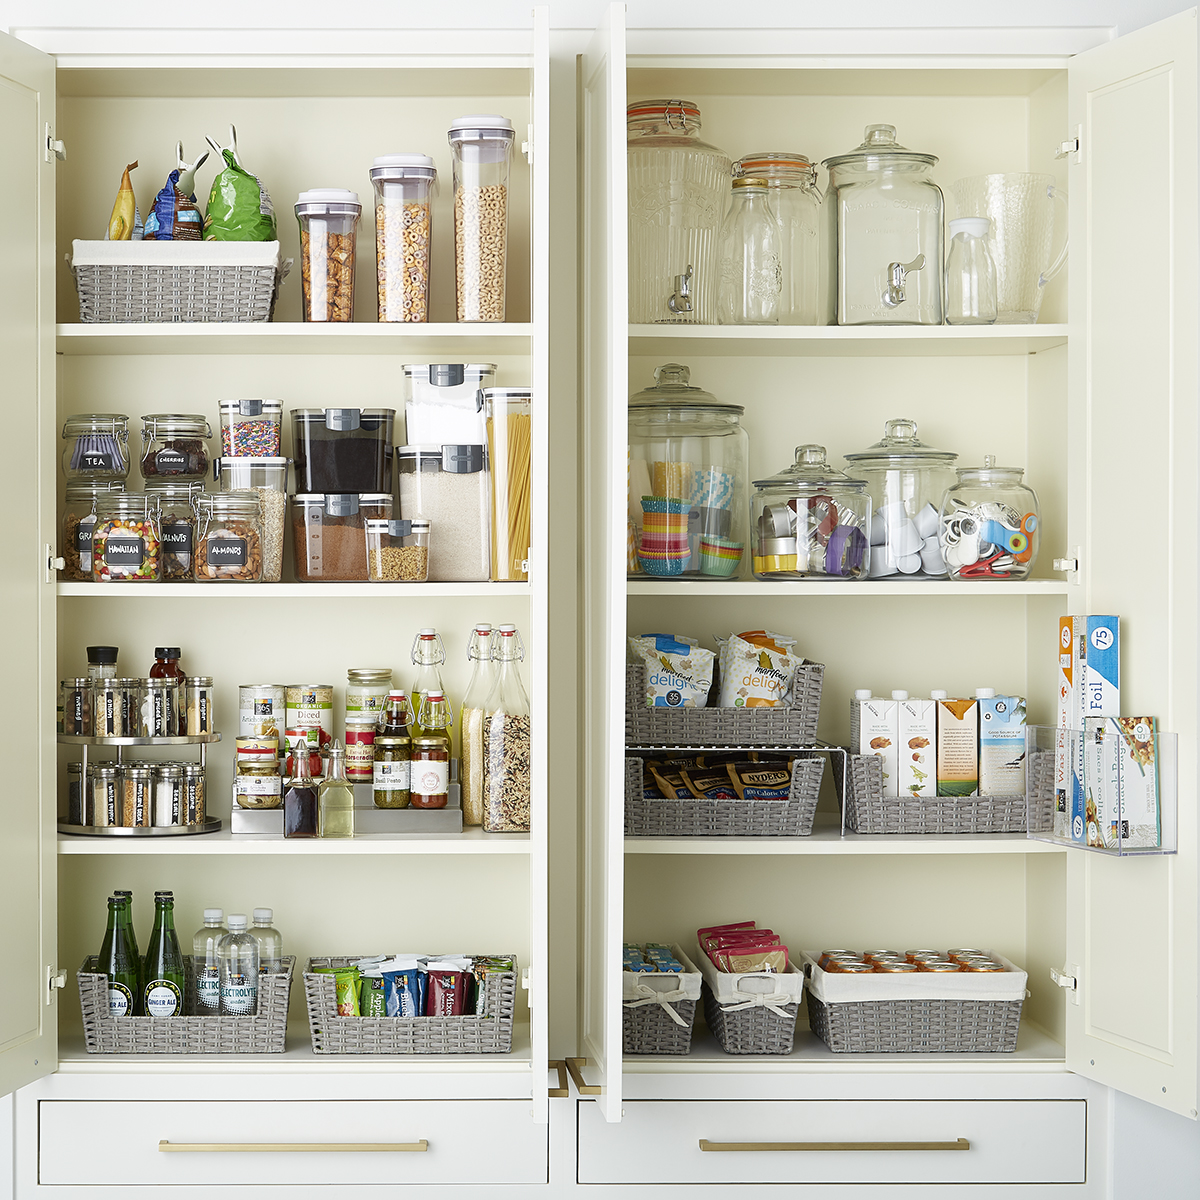 https://www.containerstore.com/catalogimages/339690/KT_18_Pantry_RGB.jpg